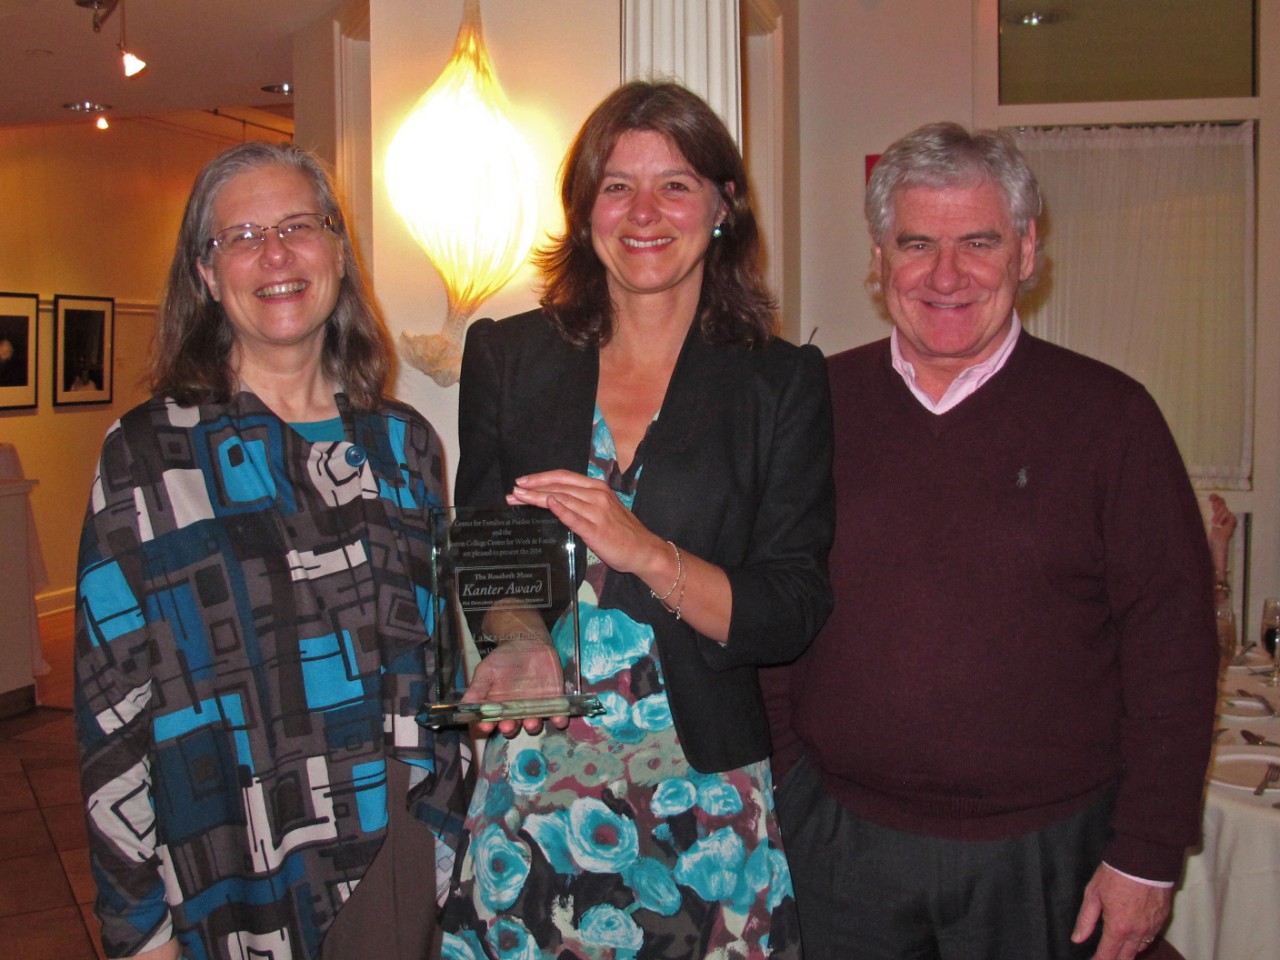 2014 Kanter award winner with Center for Work and Family staff